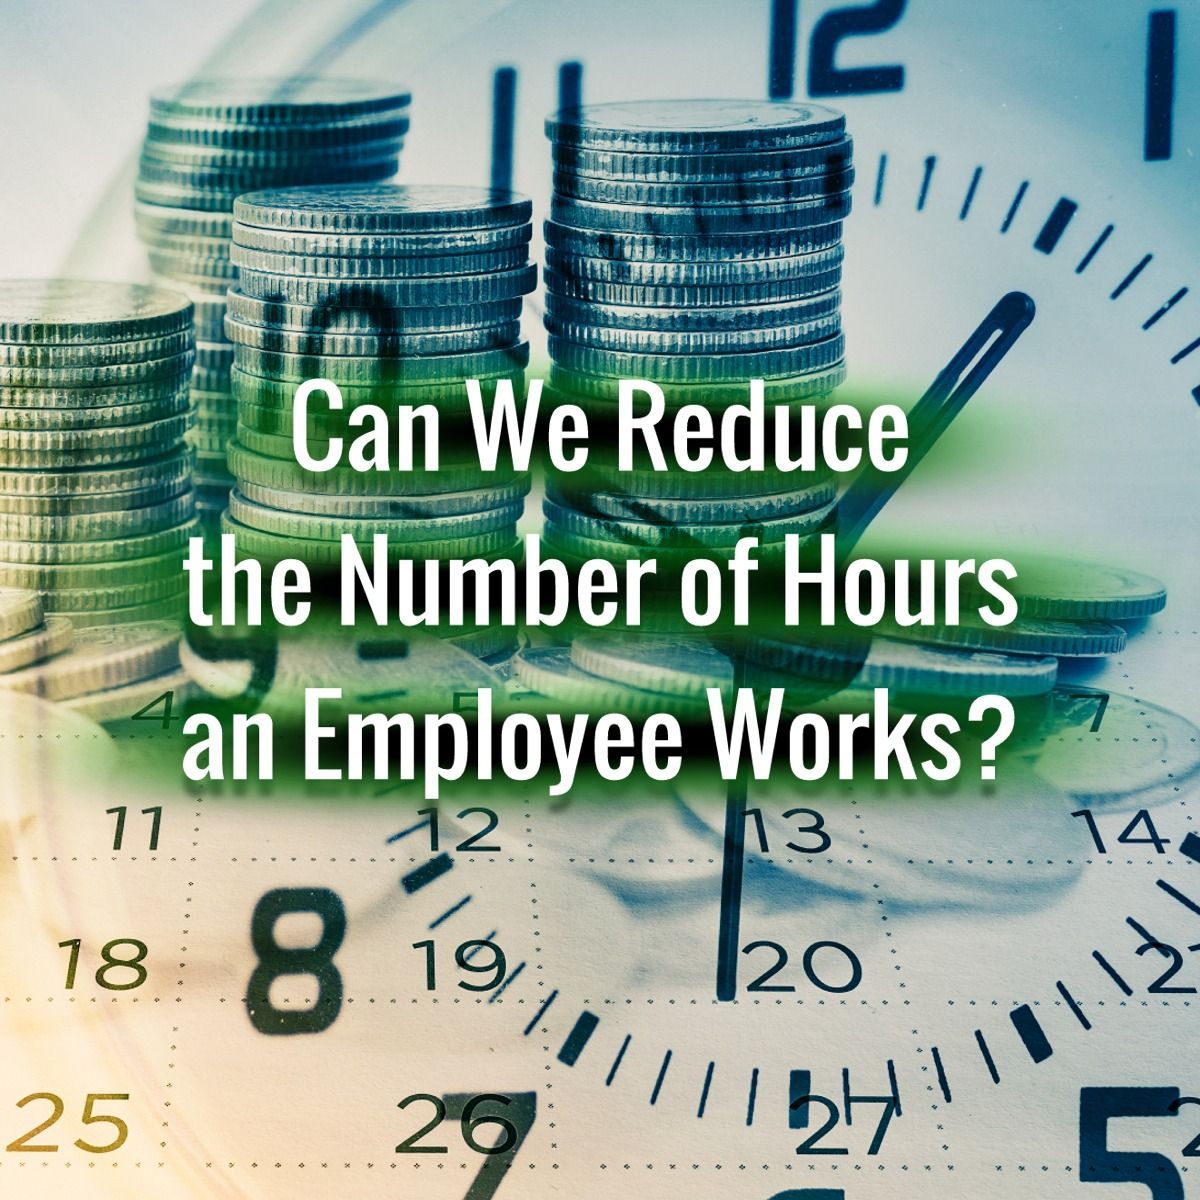 Can We Reduce the Number of Hours an Employee Works?